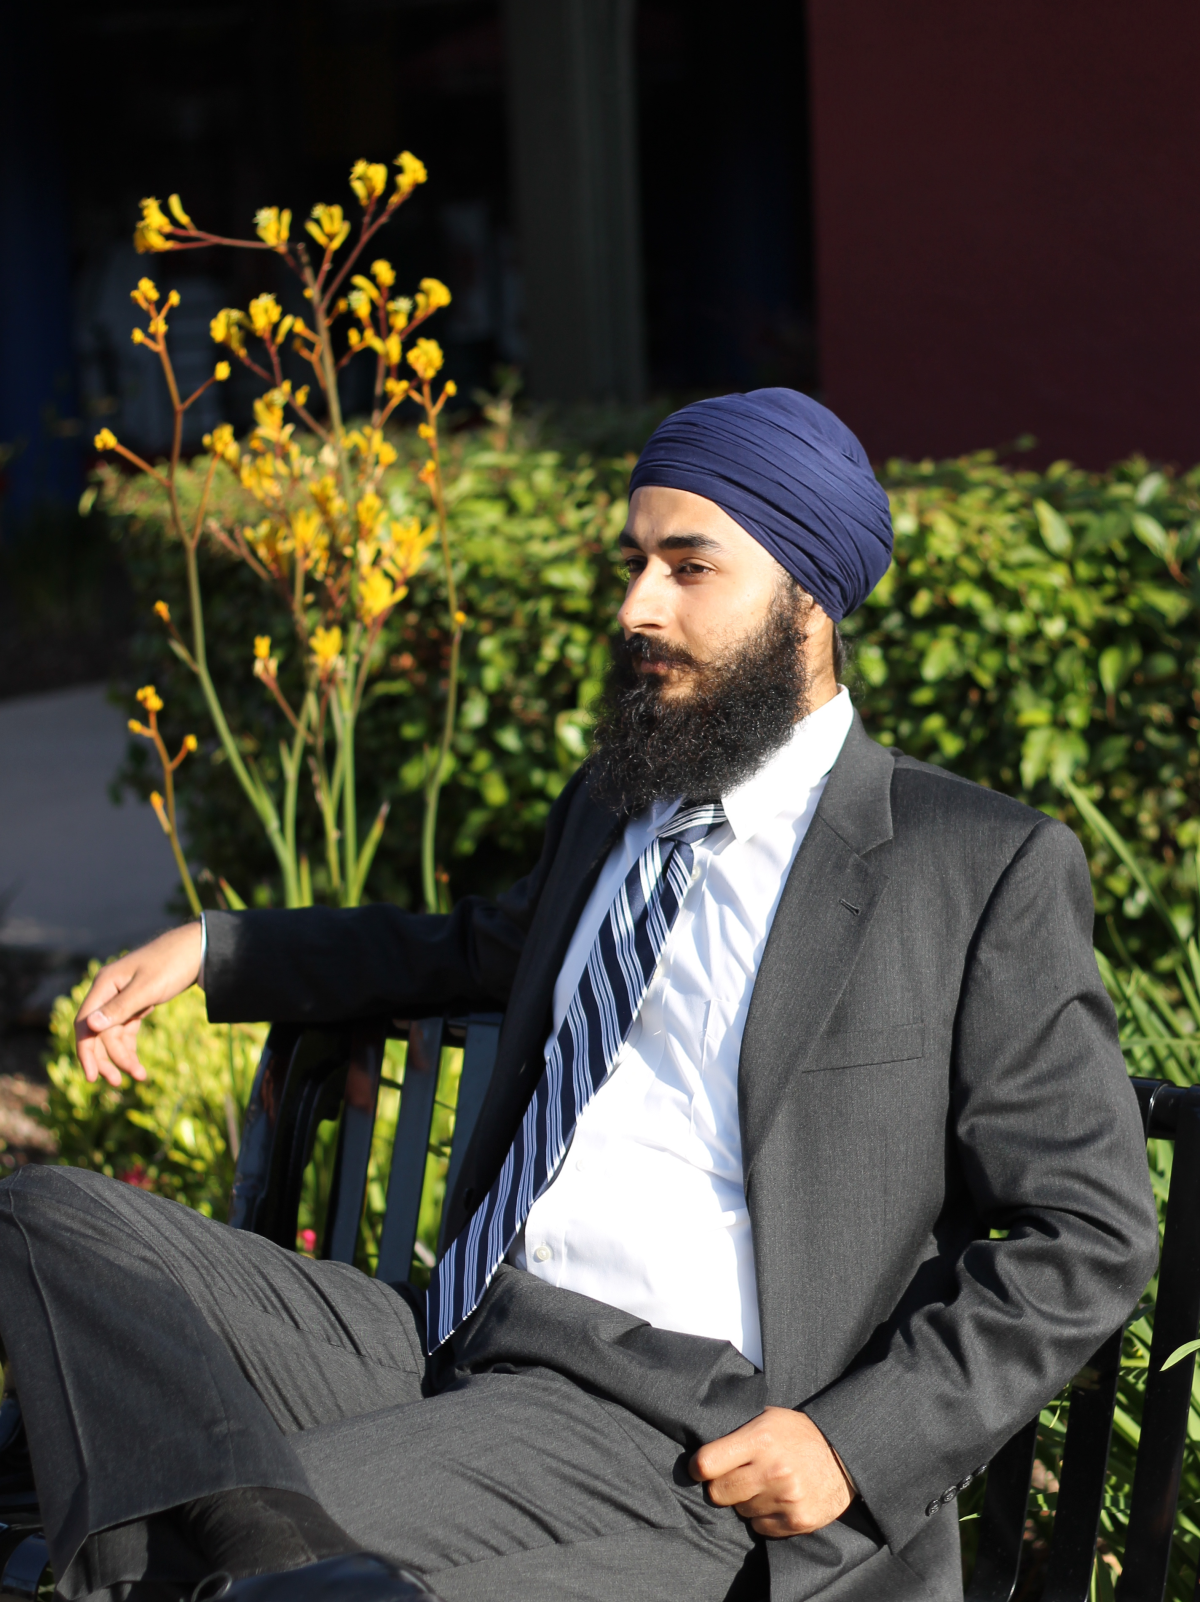 A man wearing a suit and tie and a blue turban sits in a chair outside.